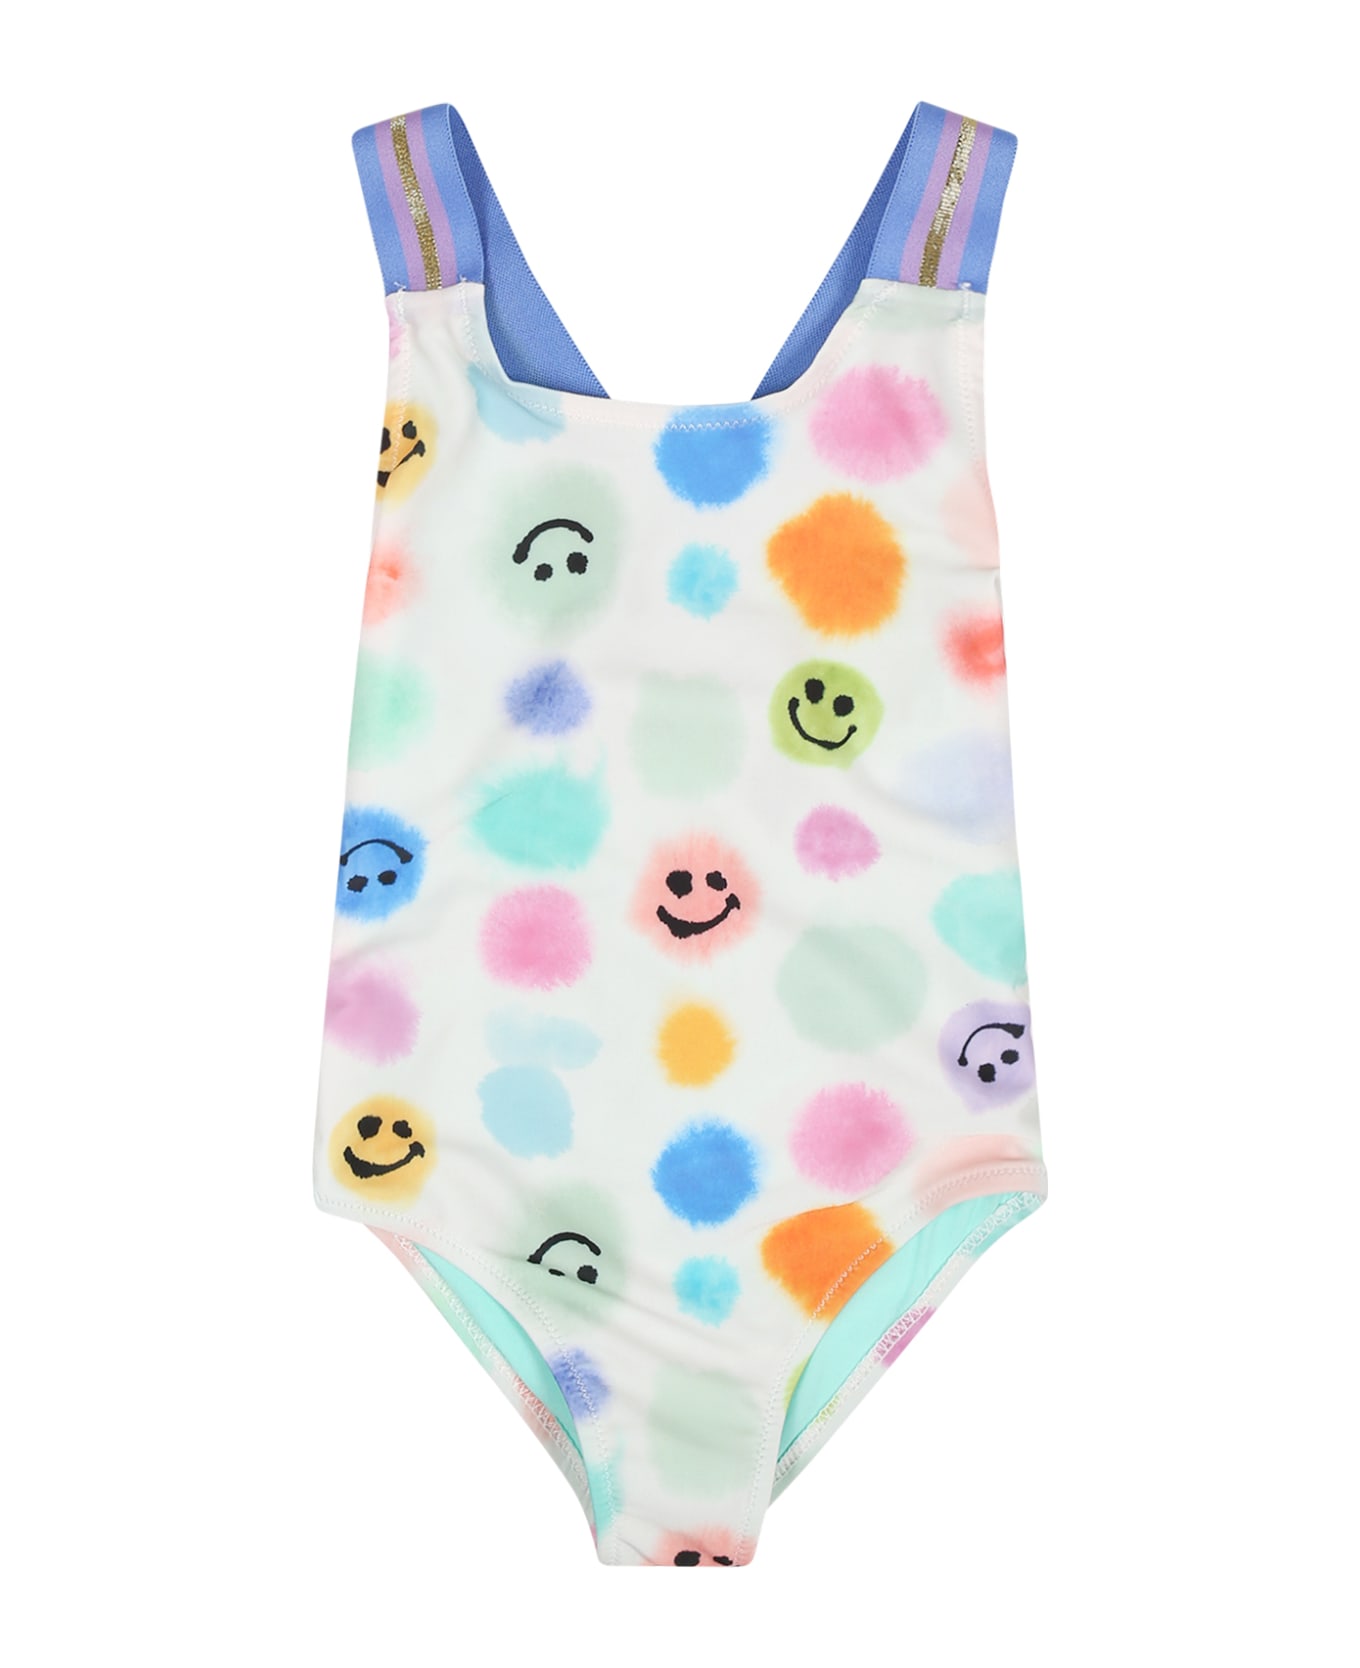 Molo White Swimsuit For Baby Girl With Polka Dots And Smiley - Multicolor 水着